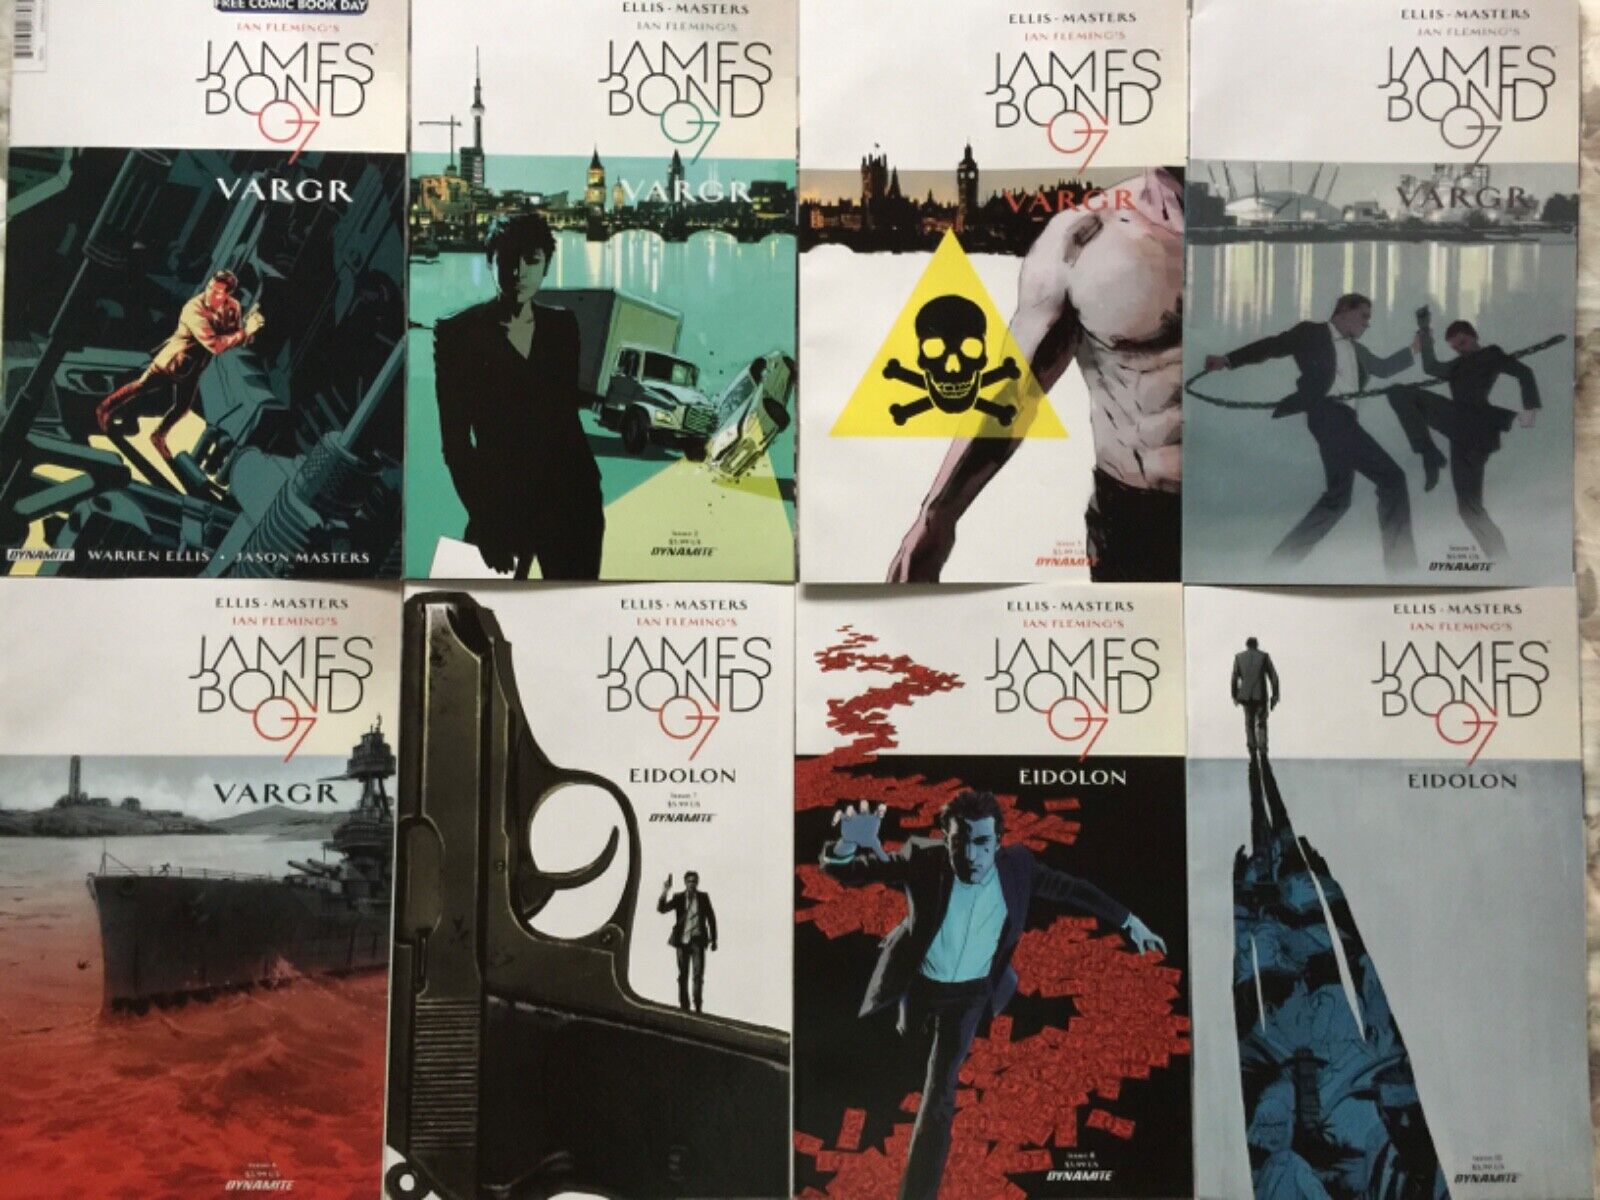 James Bond 007 Dynamite Comic Book Excellent Mixed Lot of 8 Vargr and Eidolon